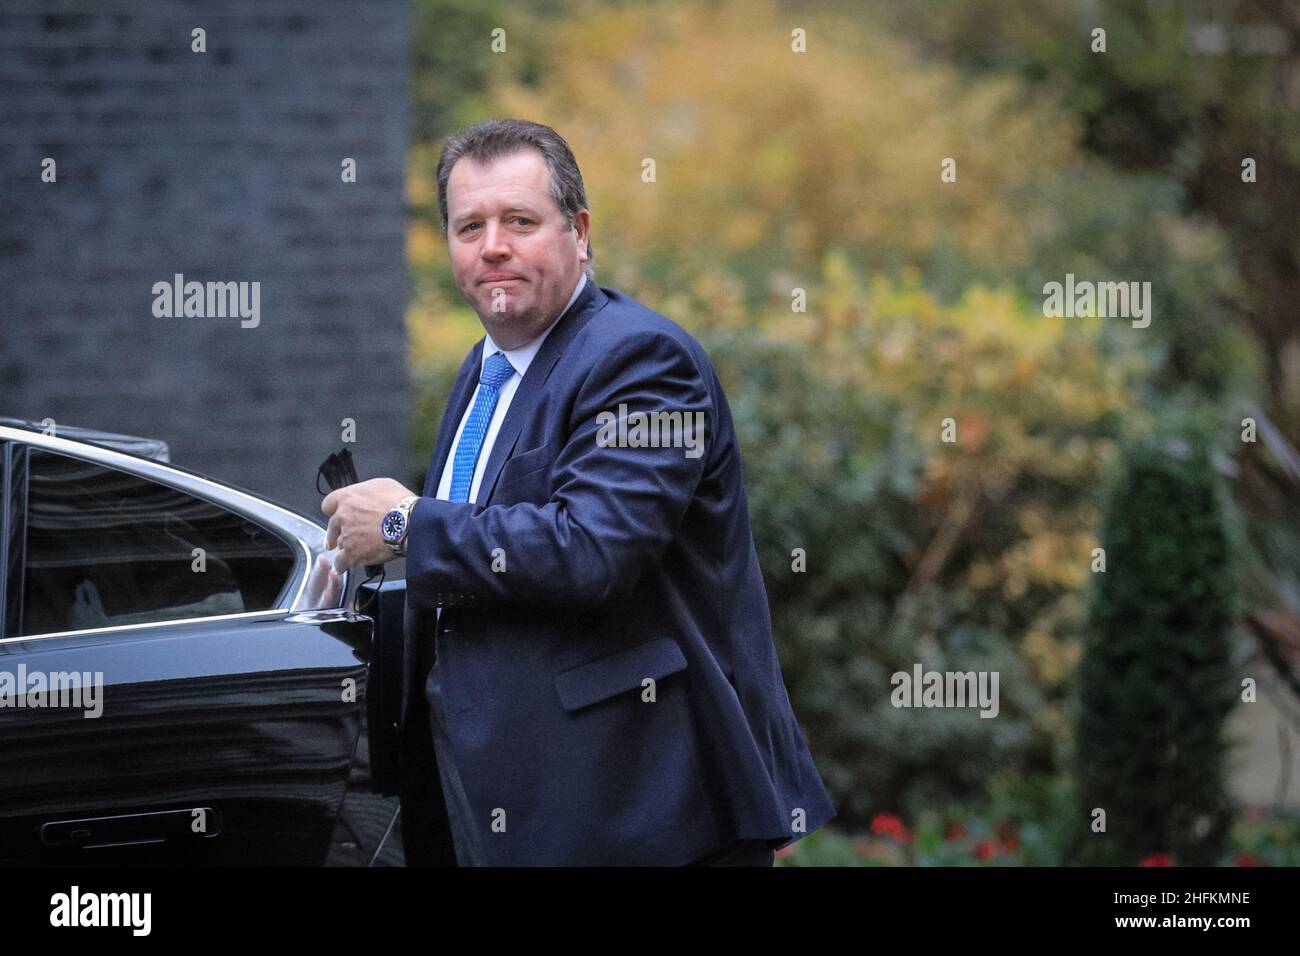 Mark Spencer MP, Parliamentary Secretary to the Treasury, British Conservative Party politician and Chief Whip, in Downing Street, London Stock Photo